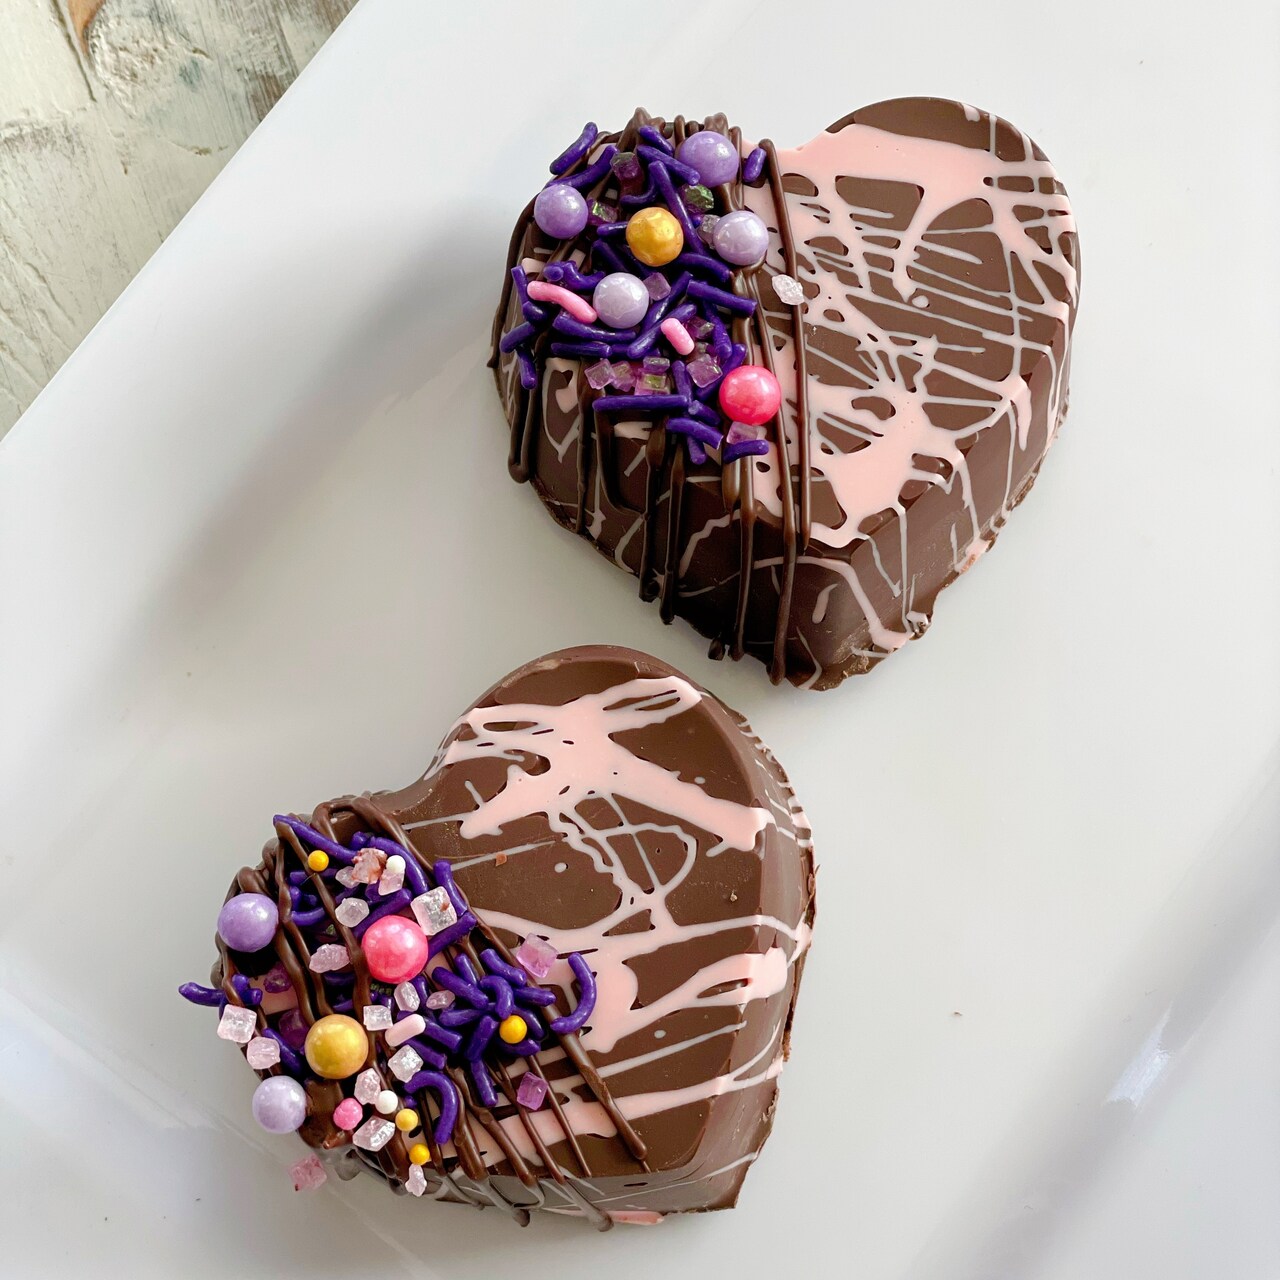 Mini Heart Chocolate Covered Cakes with @wildbakes